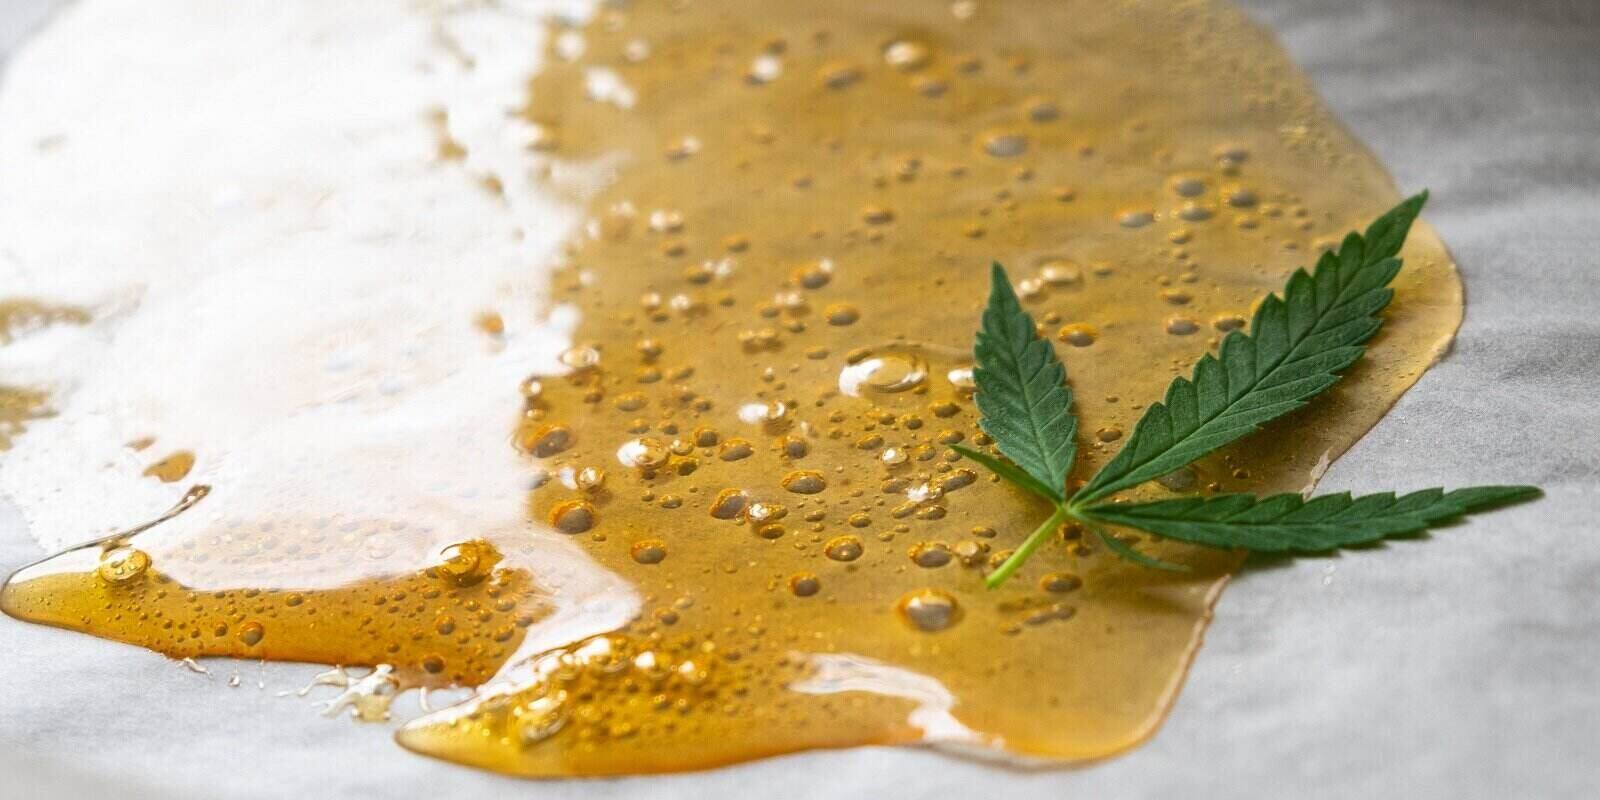 Wax 101: Everything You Need To Know About Cannabis Wax